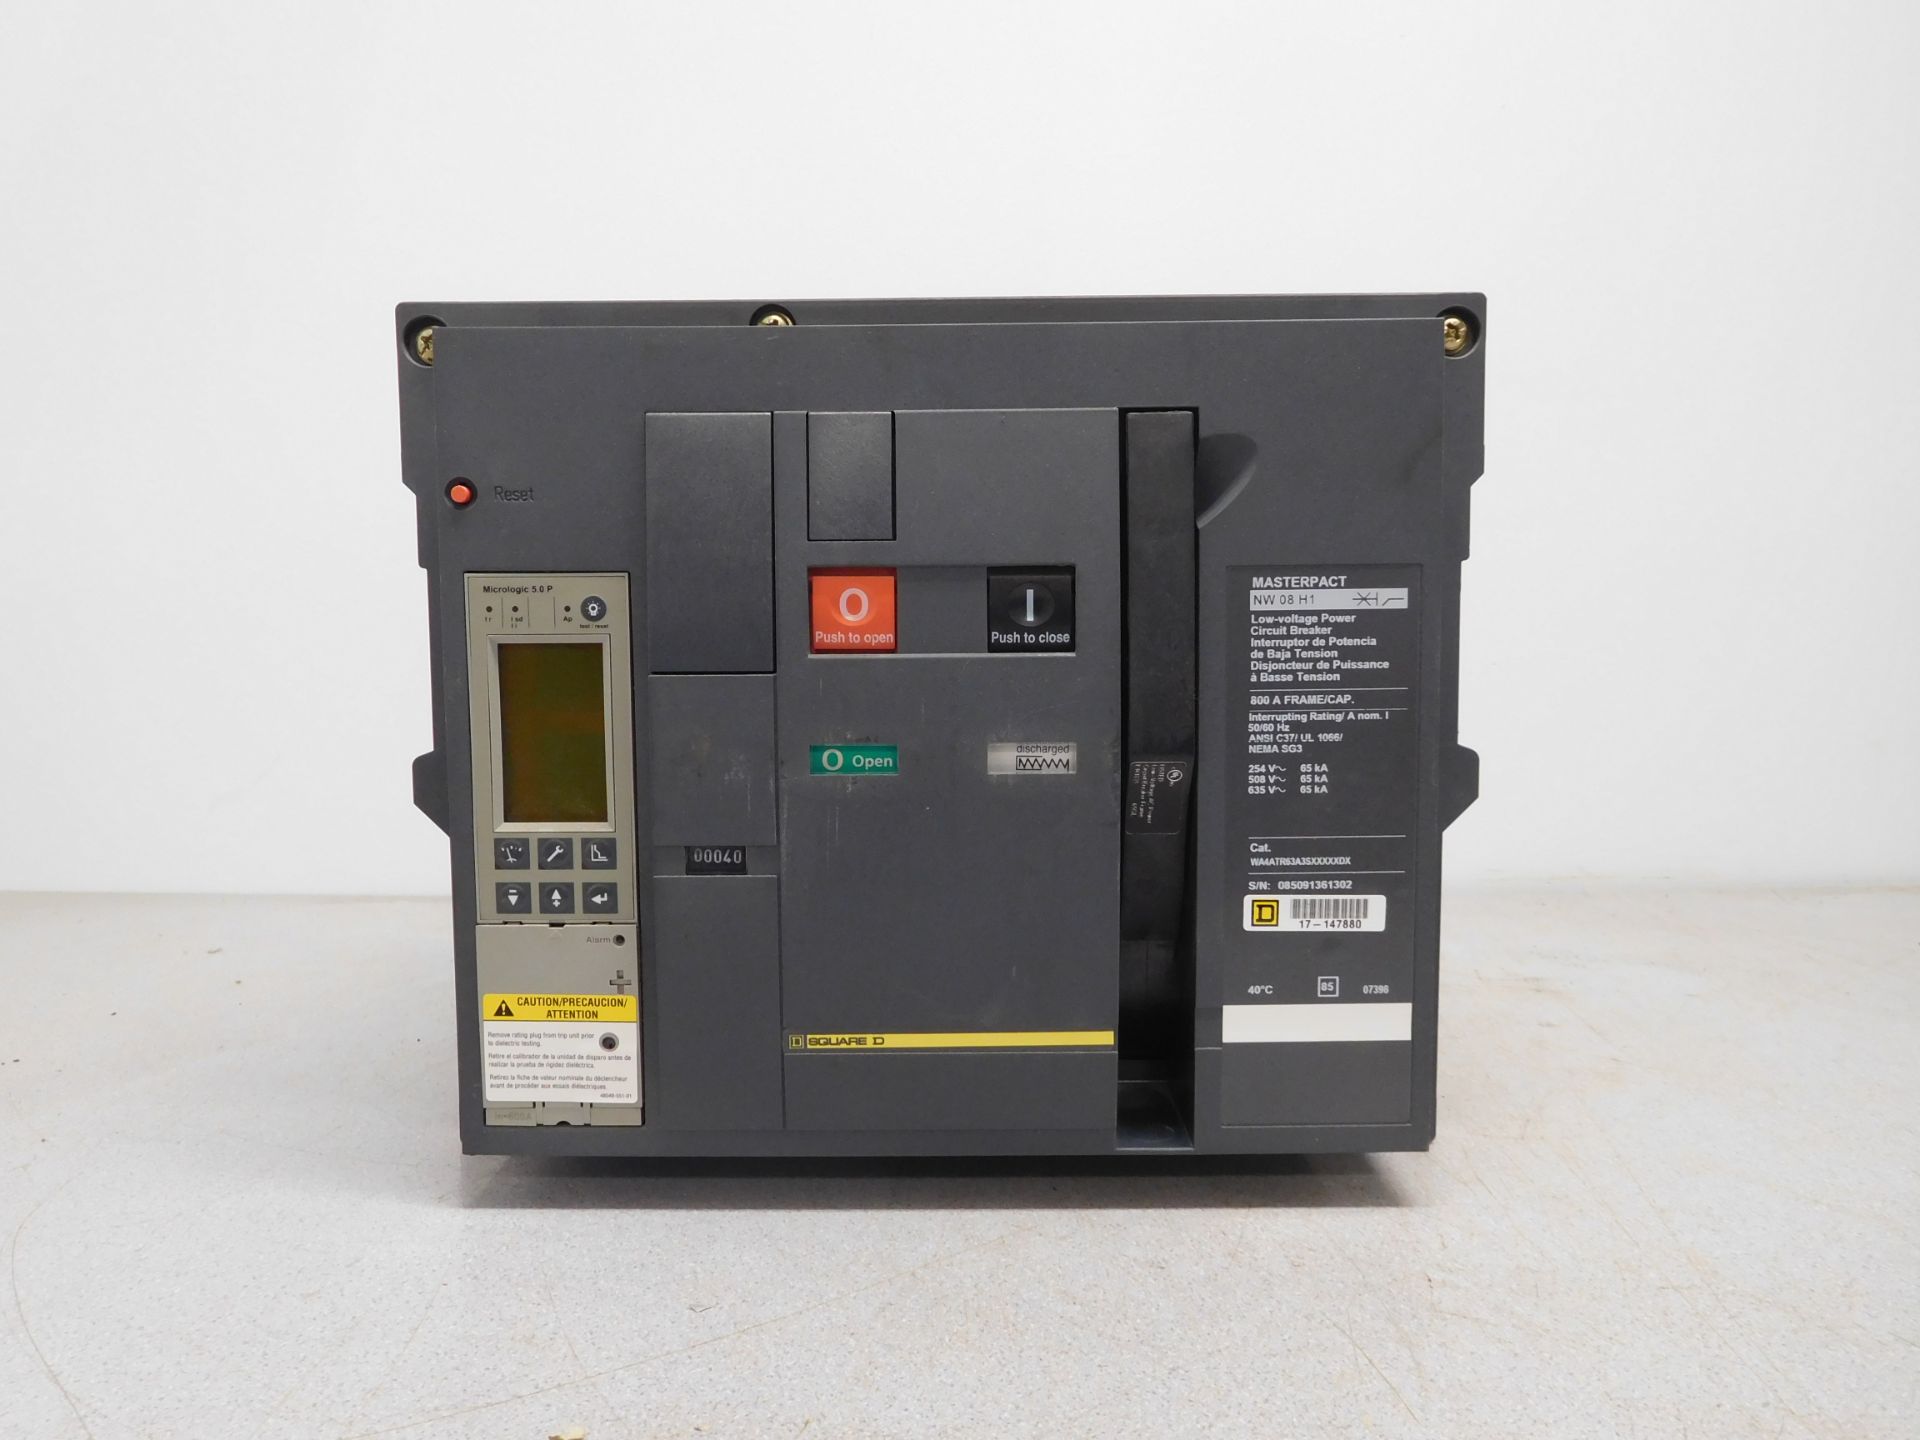 Square D NW 08 H1 Masterpact 800 Amp Low-Voltage Power Circuit Breaker